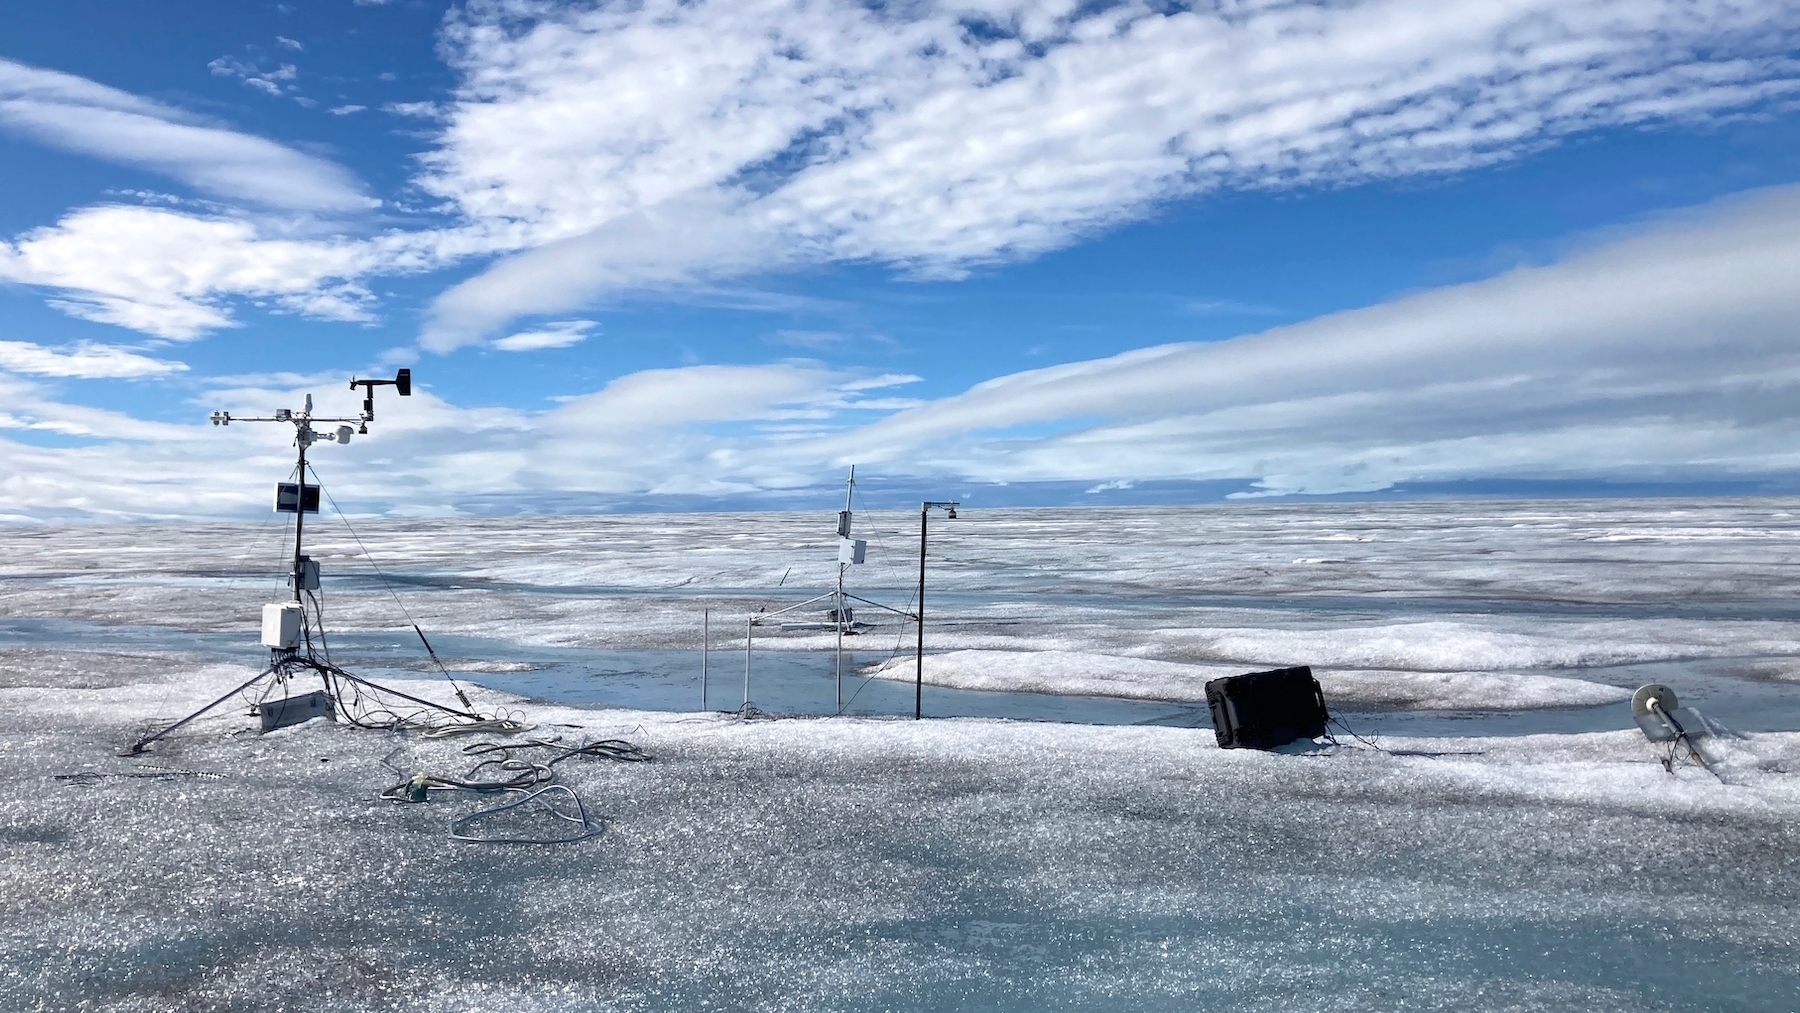 A sheet of ice stretches out in front of a blue sky. There is equipment sticking into the ice, and parts of it are melting.